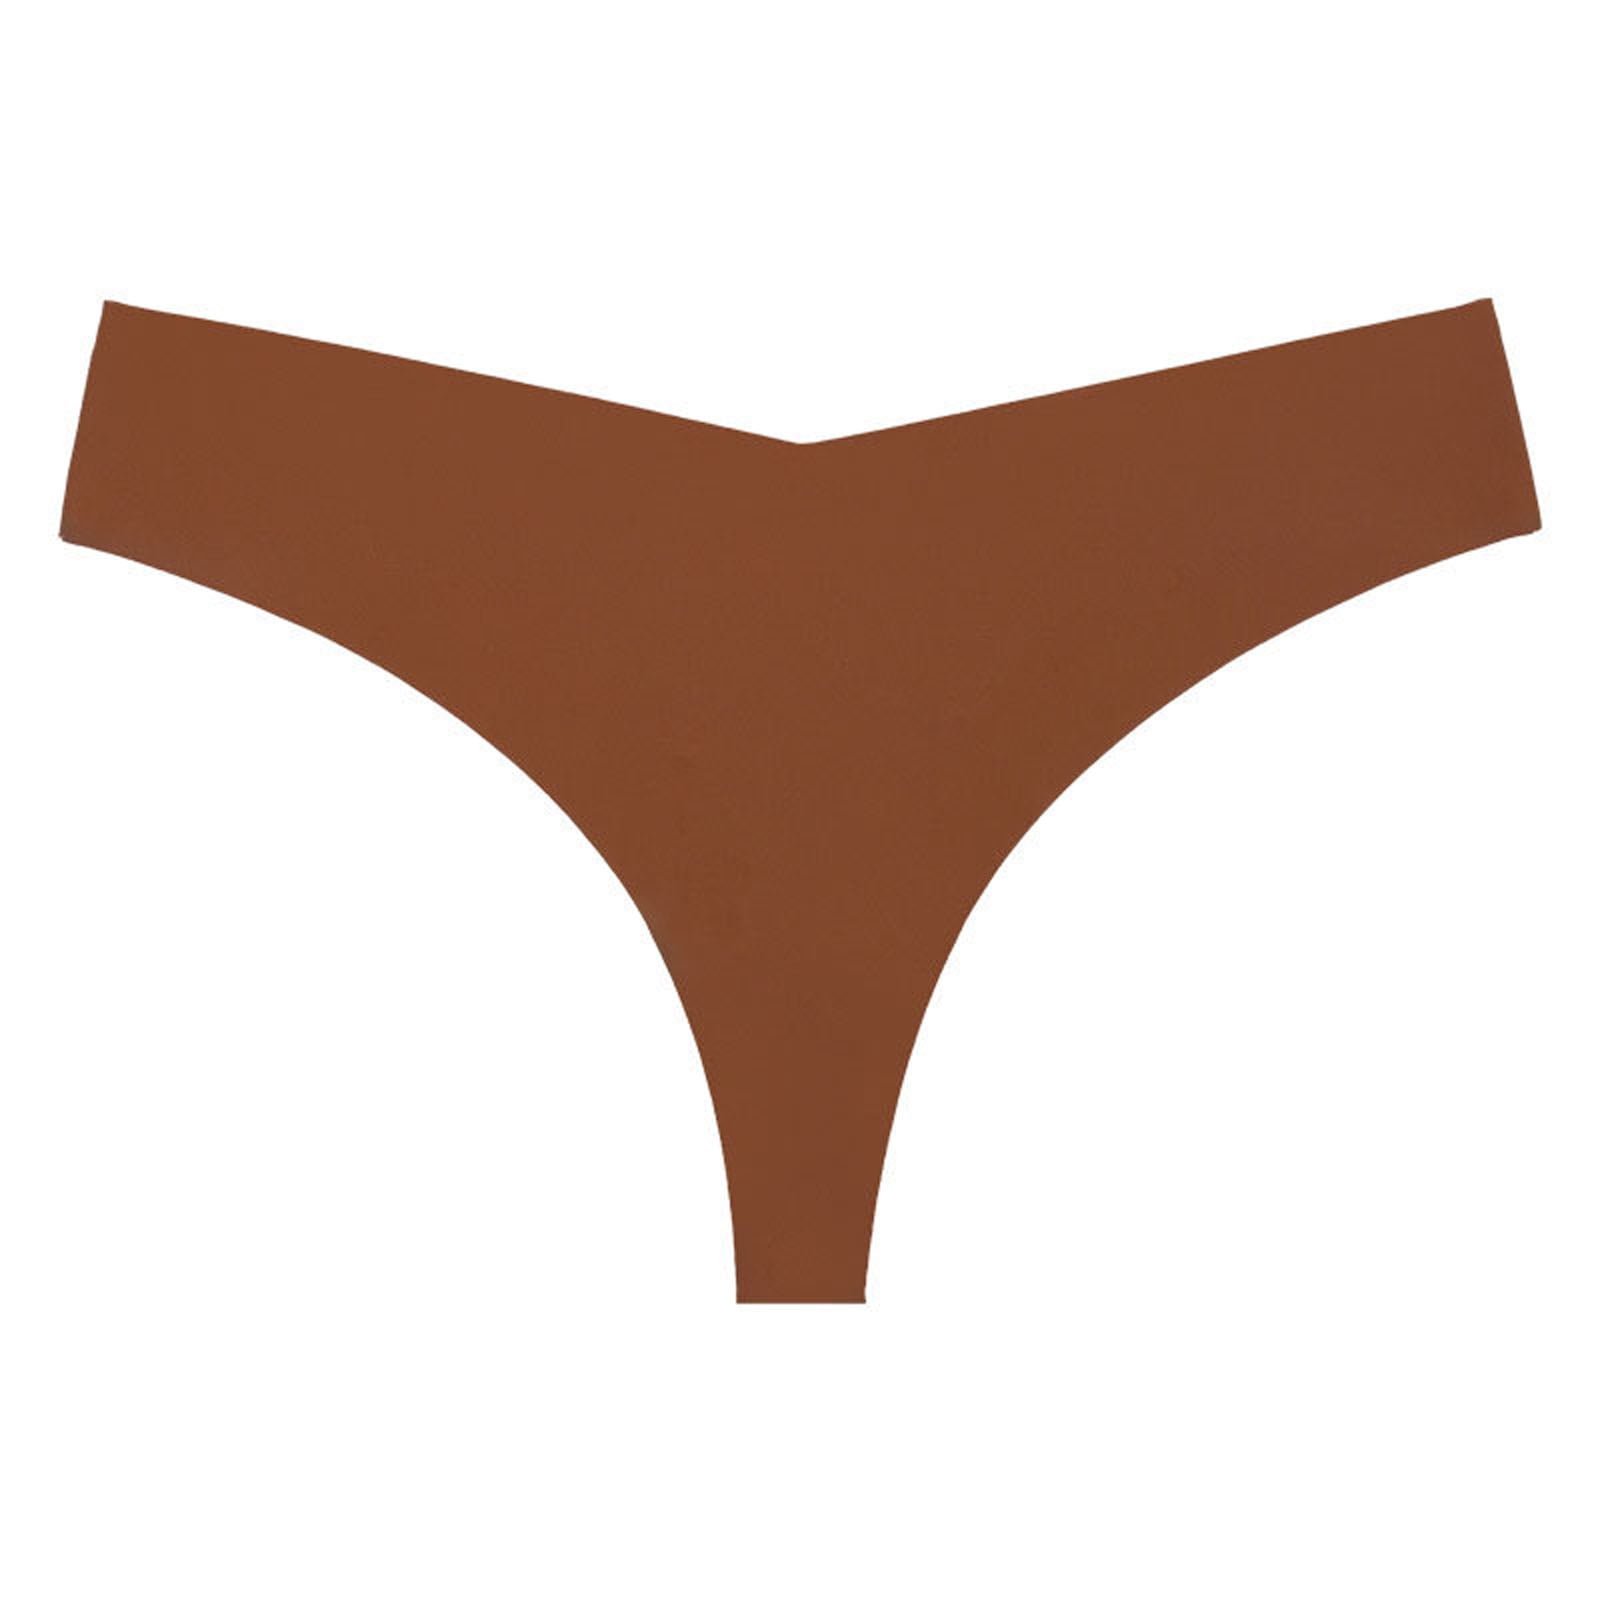 adviicd t Panty for Women Women's Underwear, High Waist Cotton Breathable  Full Coverage Panties Brief Regular and Plus Size Brown Medium 